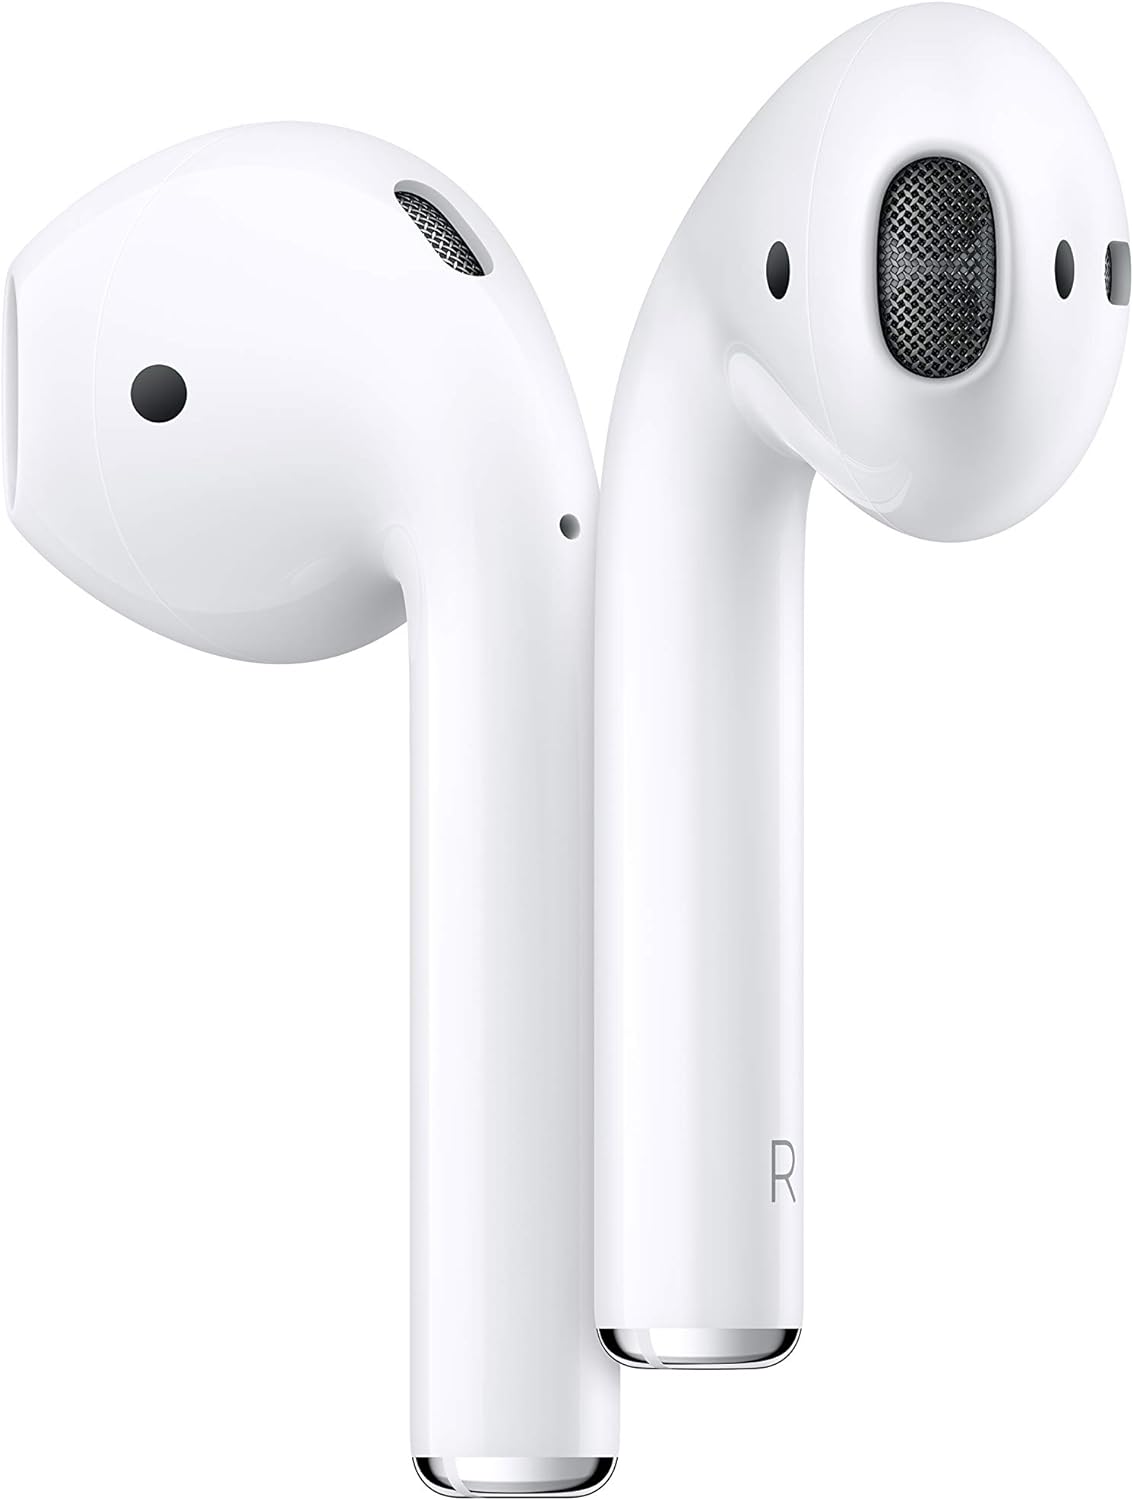 Apple AirPods (2nd Generation): Save $30!